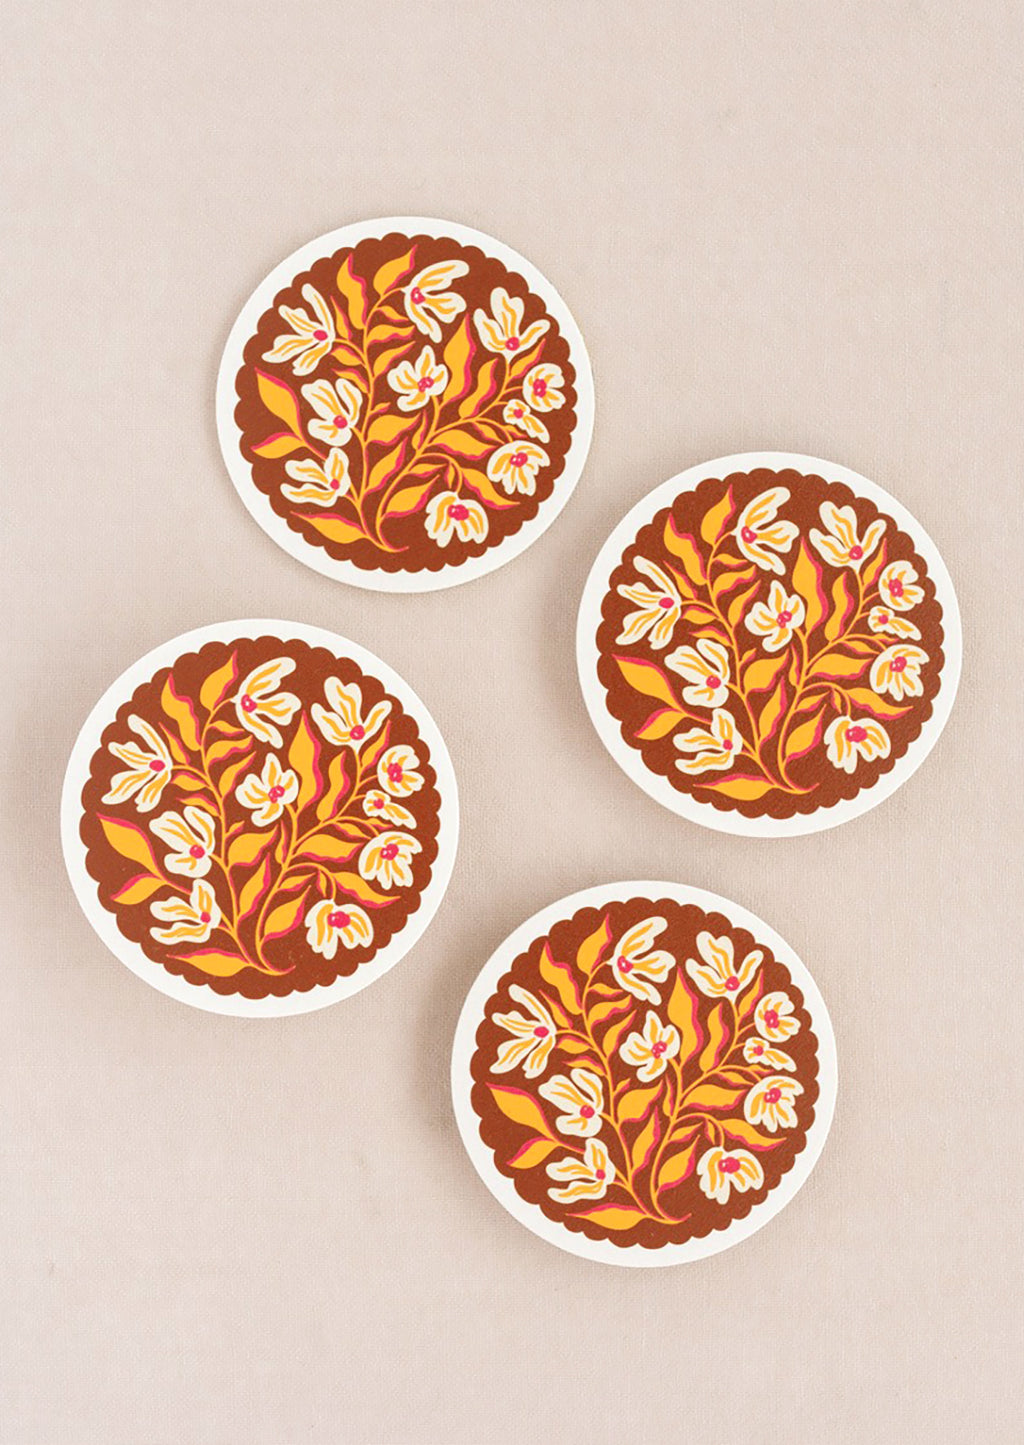 Scalloped Floral: A set of paper coasters in scalloped floral print.